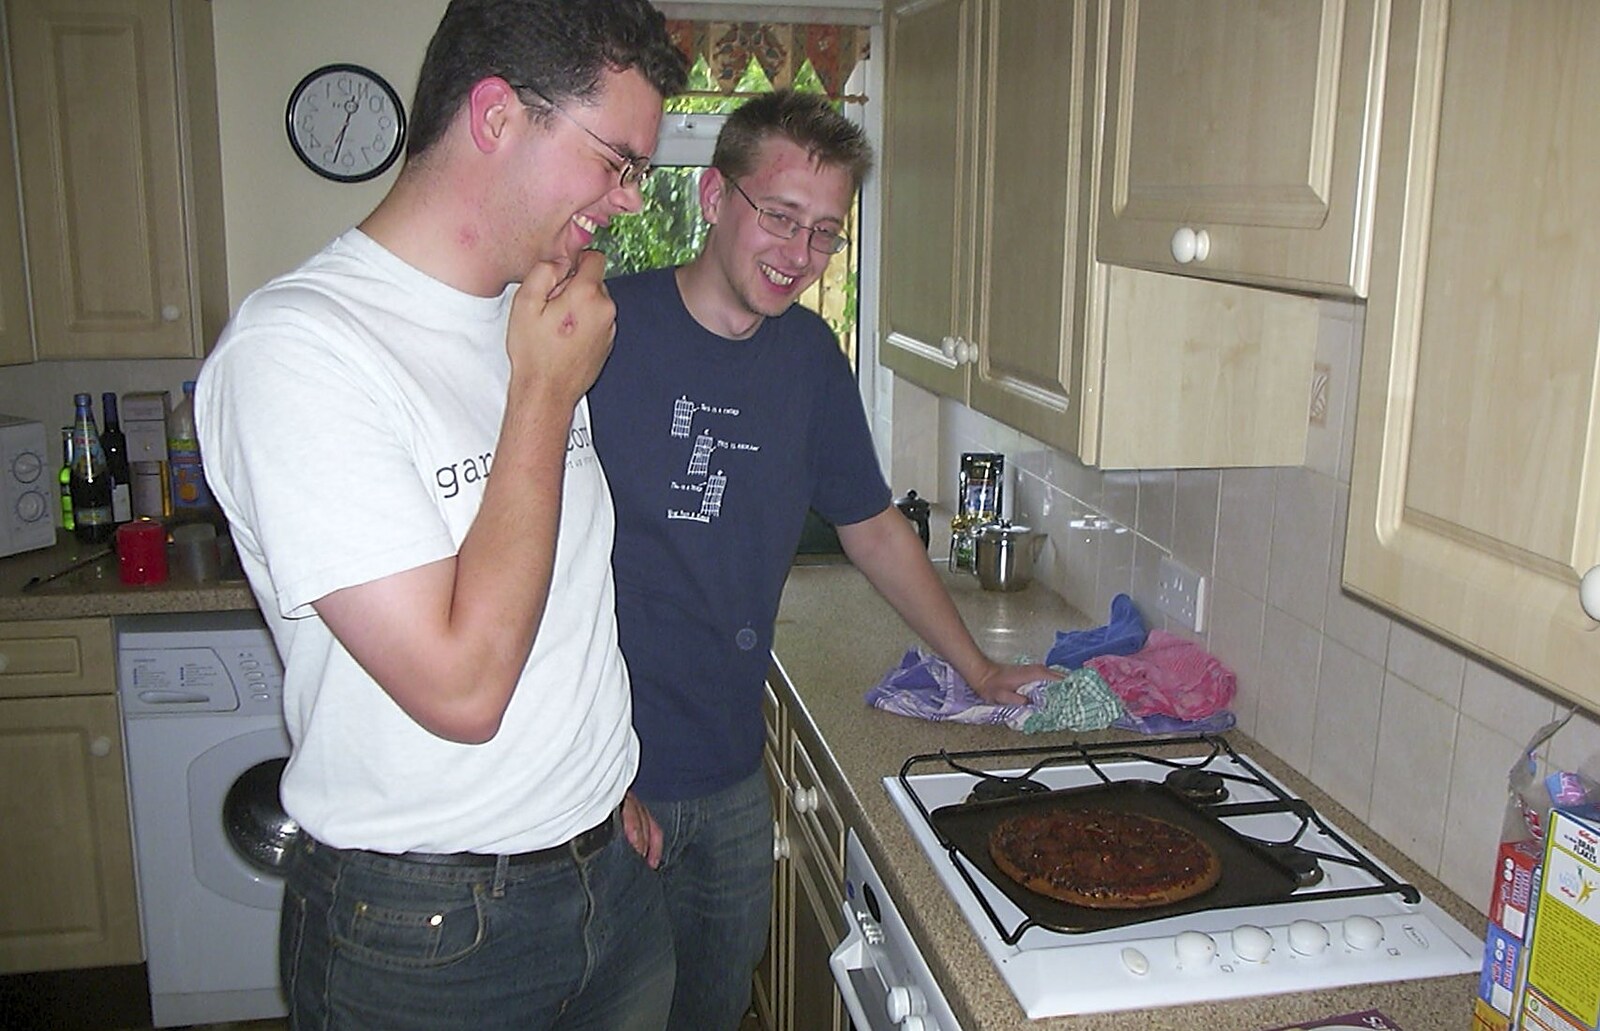 3G Lab at Jools Holland, Audley End, Saffron Walden, Essex - 25th July 2004: Dave has slightly overdone his pizza